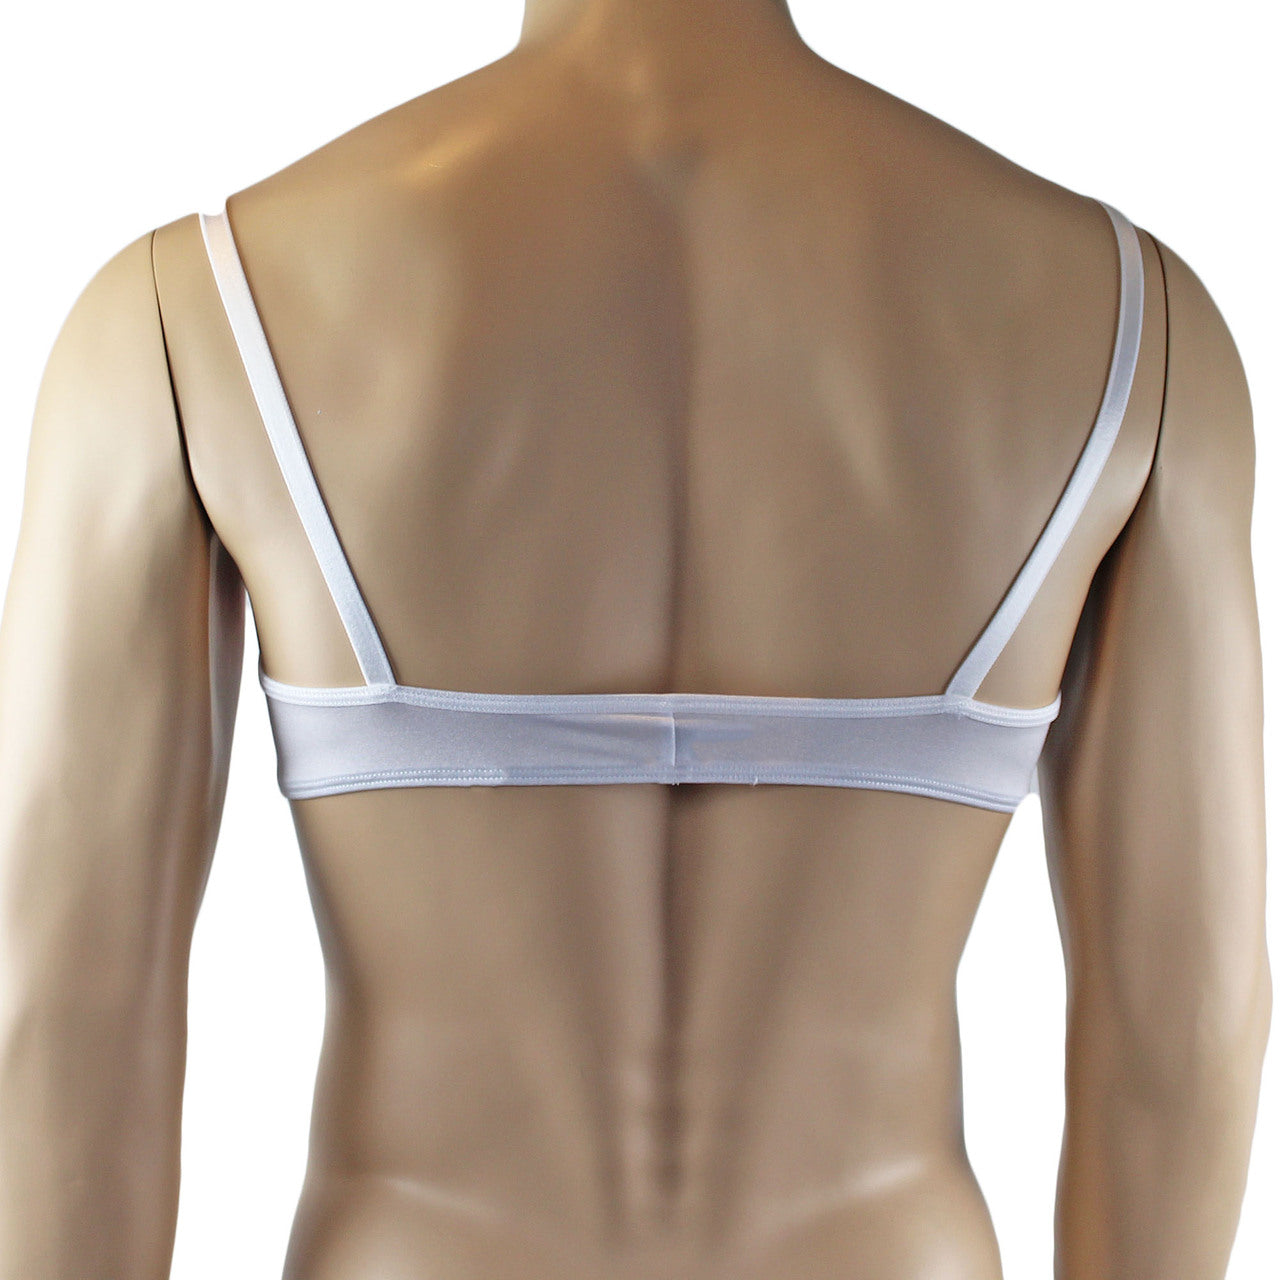 Mens Luxury Spandex & Lace Bra Top and G string White